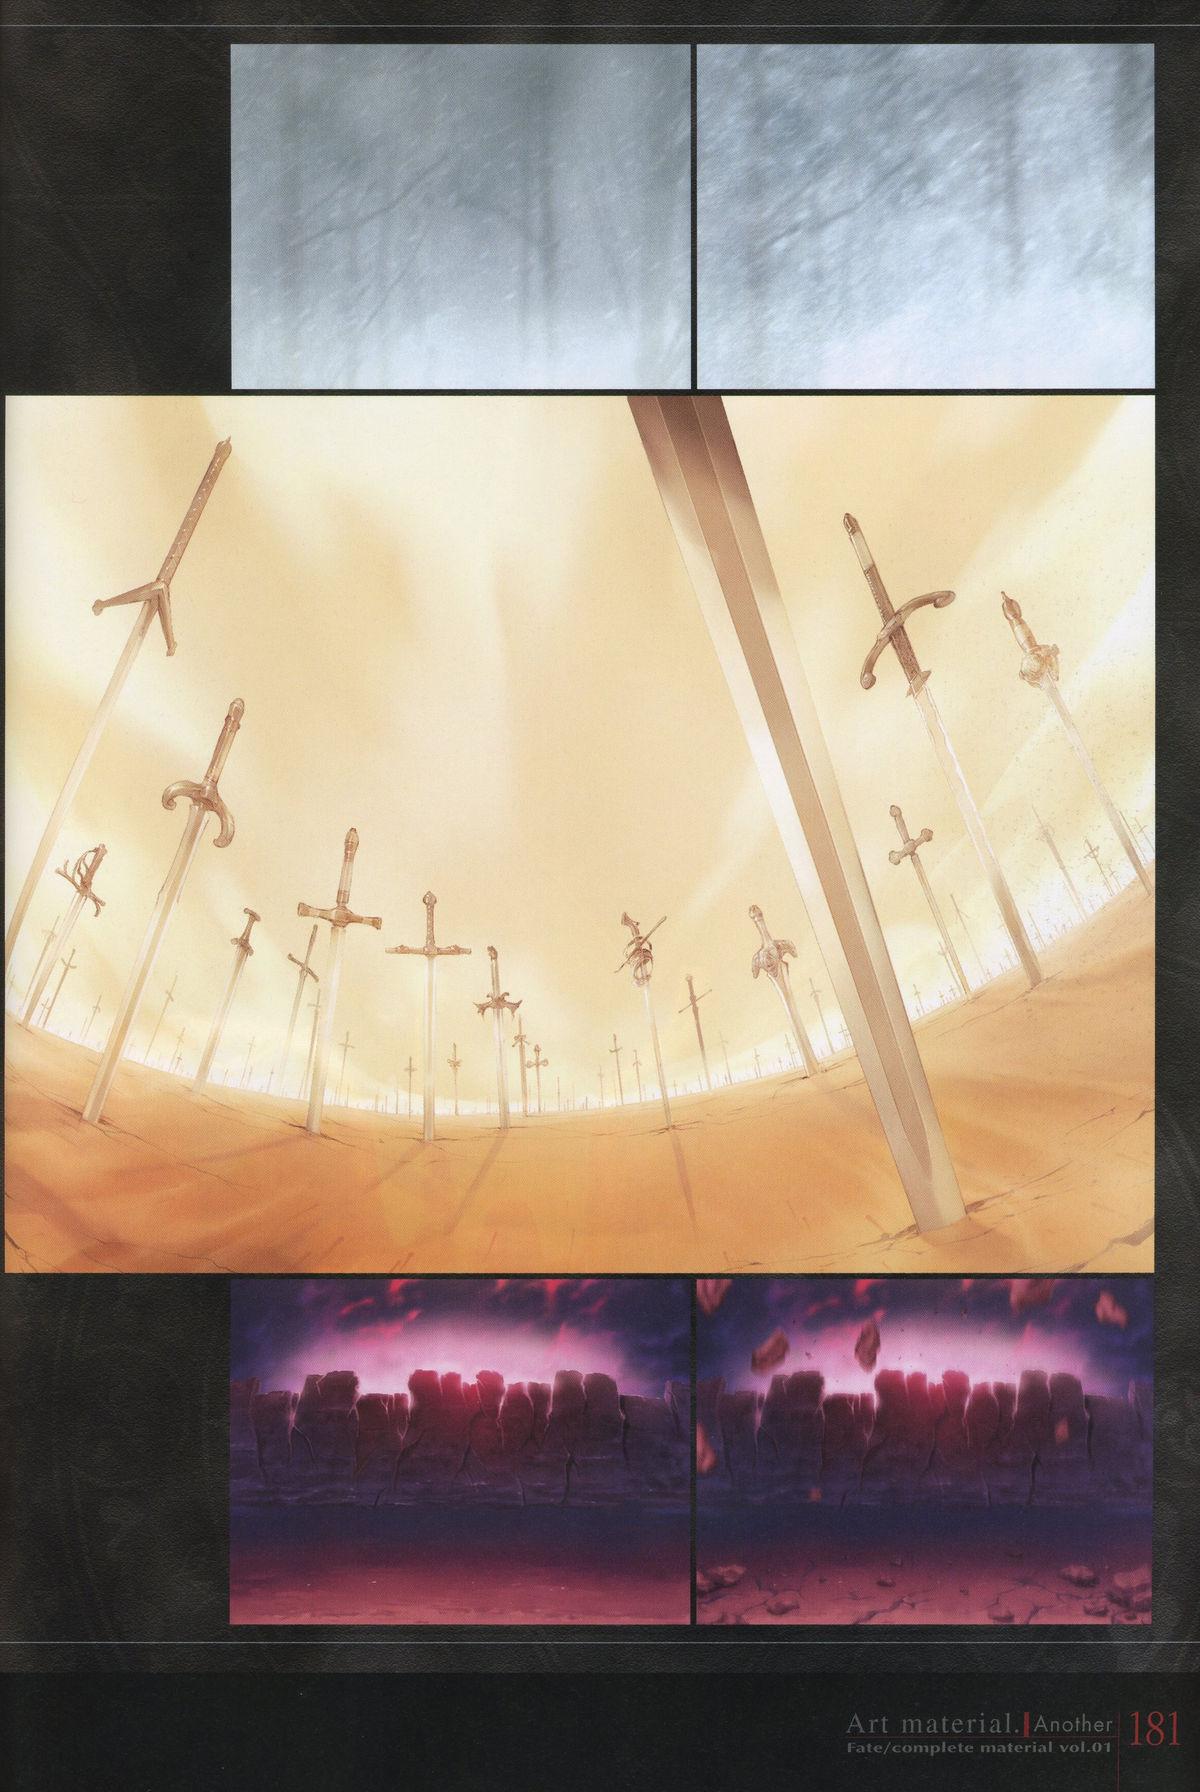 Fate/complete material I - Art material. 185